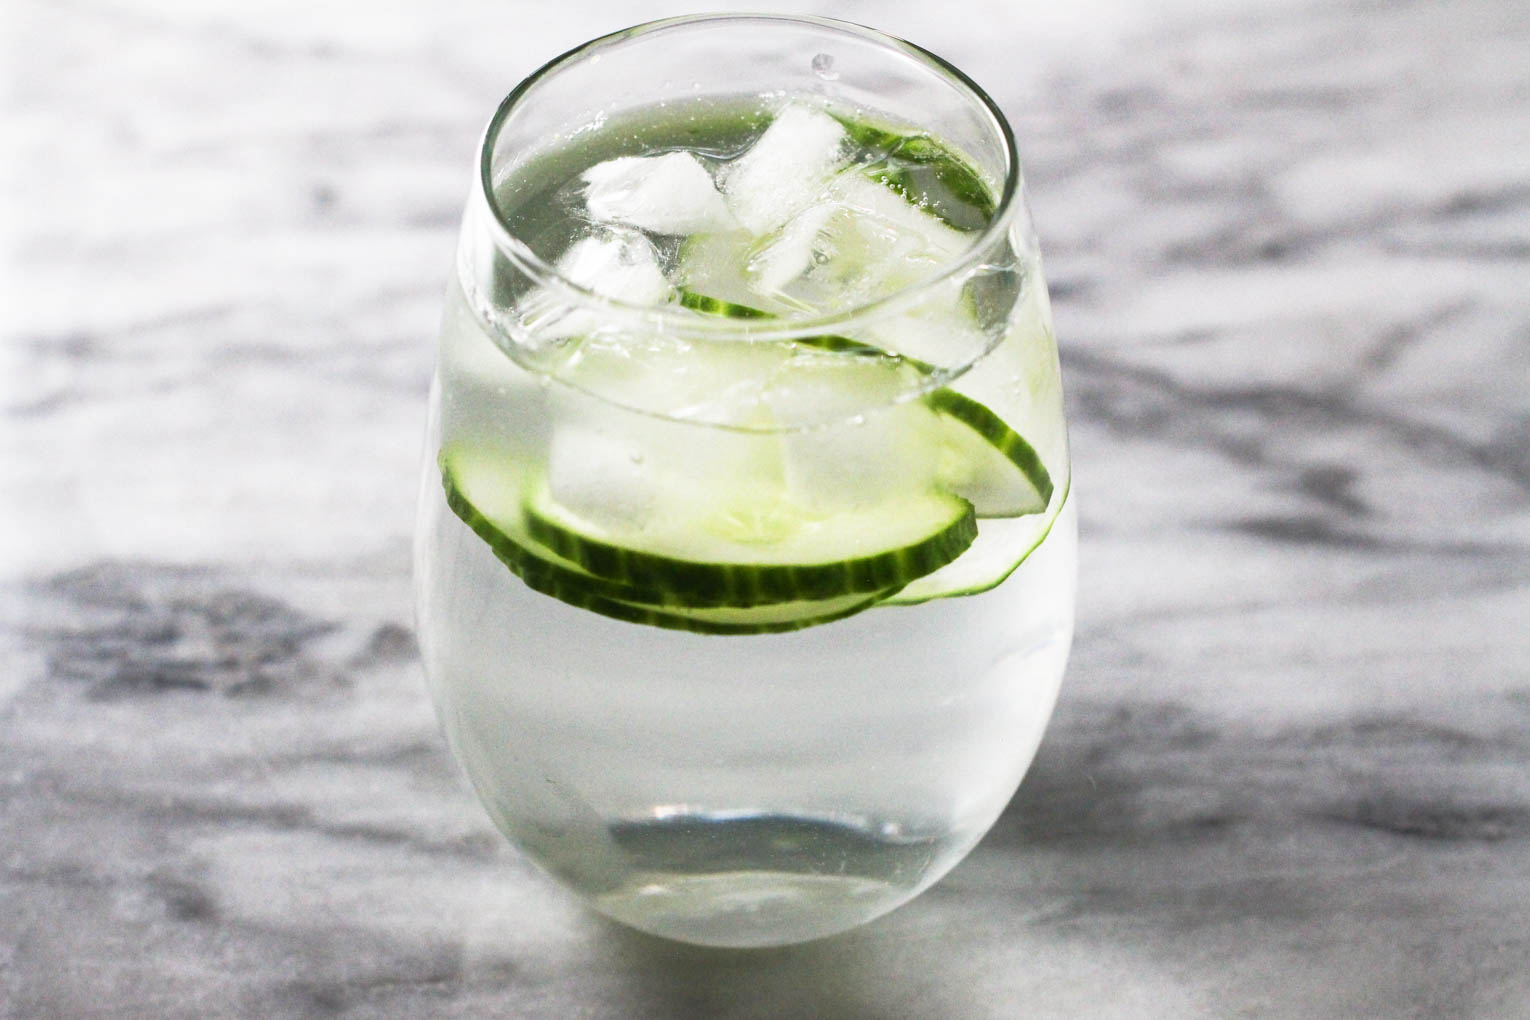 A glass with water, cucumber slices and ice on the marble background.